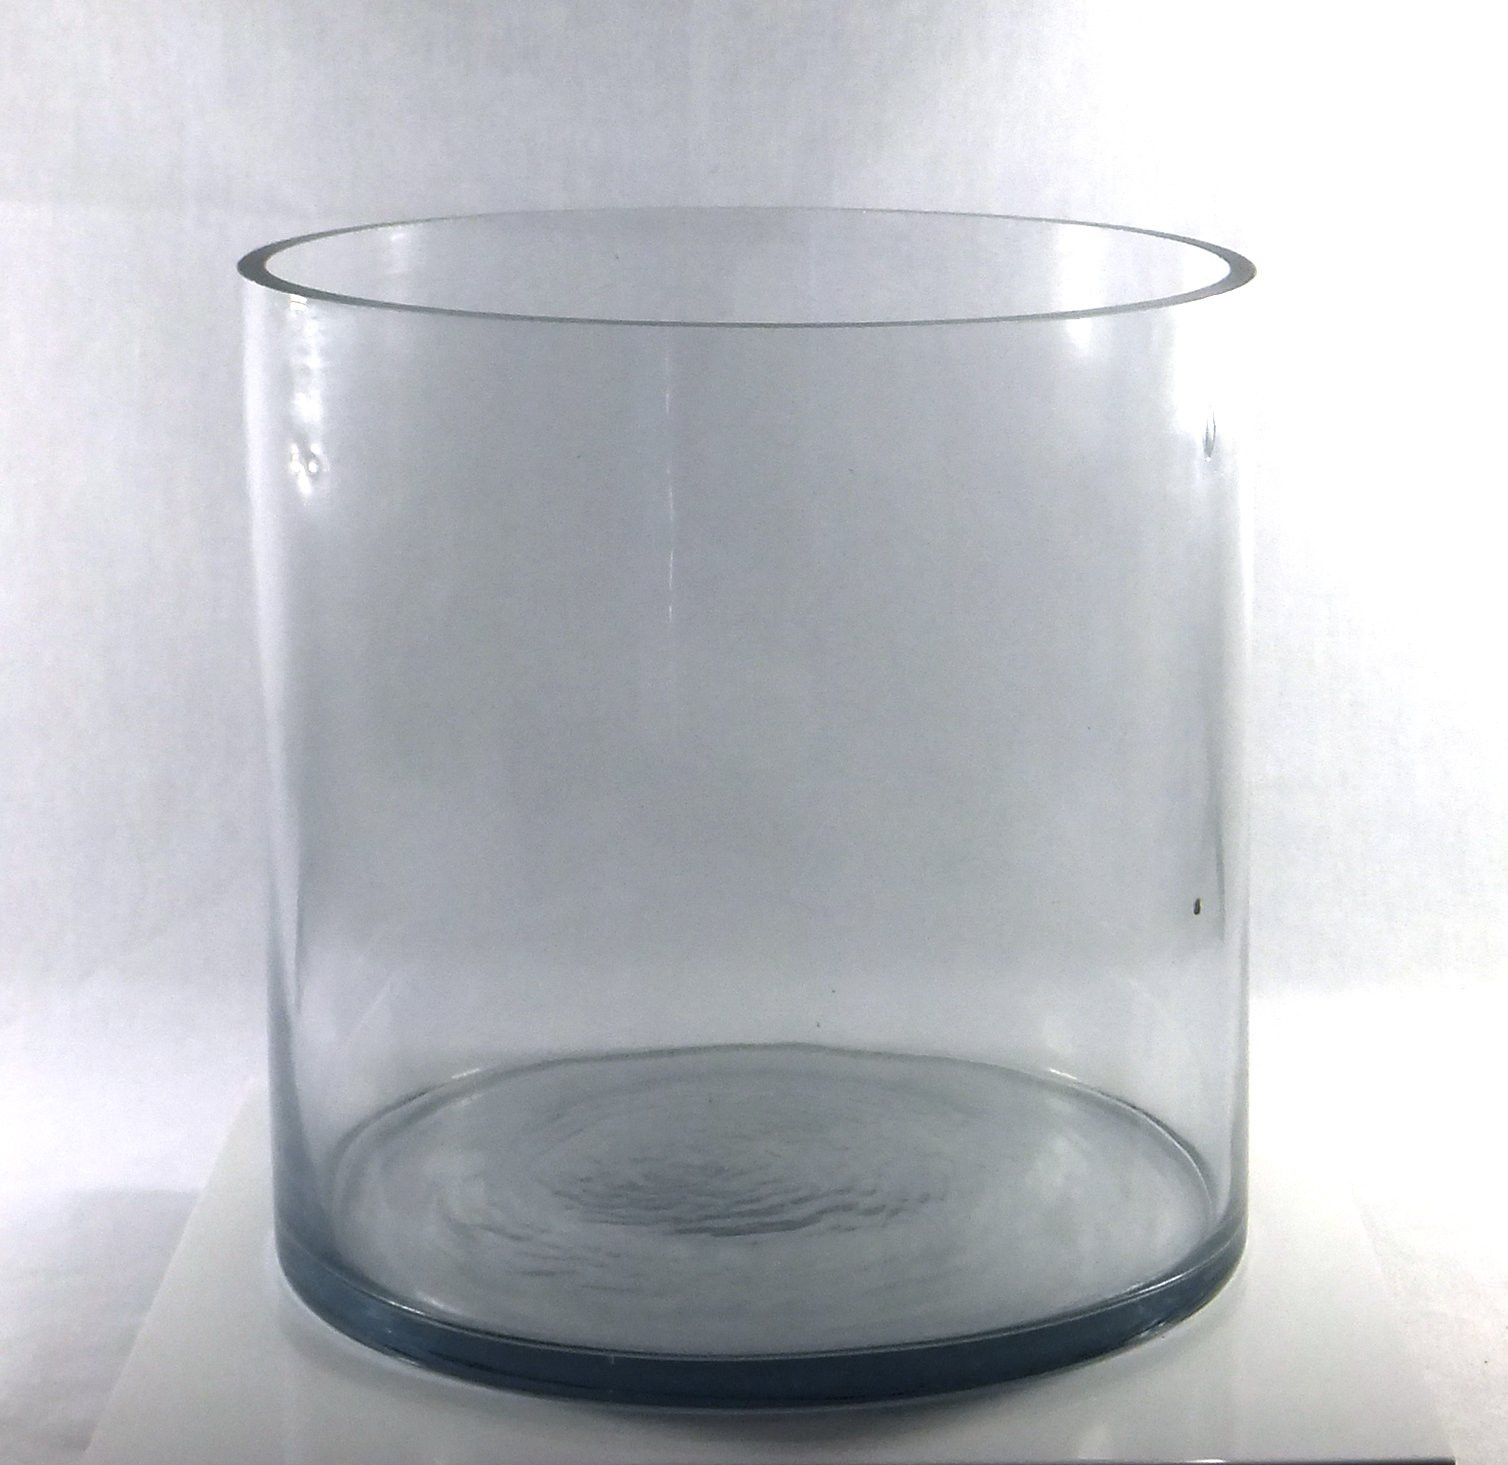 28 Fashionable Clear Glass Cylinder Vase Candle Holder 2024 free download clear glass cylinder vase candle holder of buy 8 inch round large glass vase 8 clear cylinder oversize in 8 inch round large glass vase 8 clear cylinder oversize centerpiece 8x8